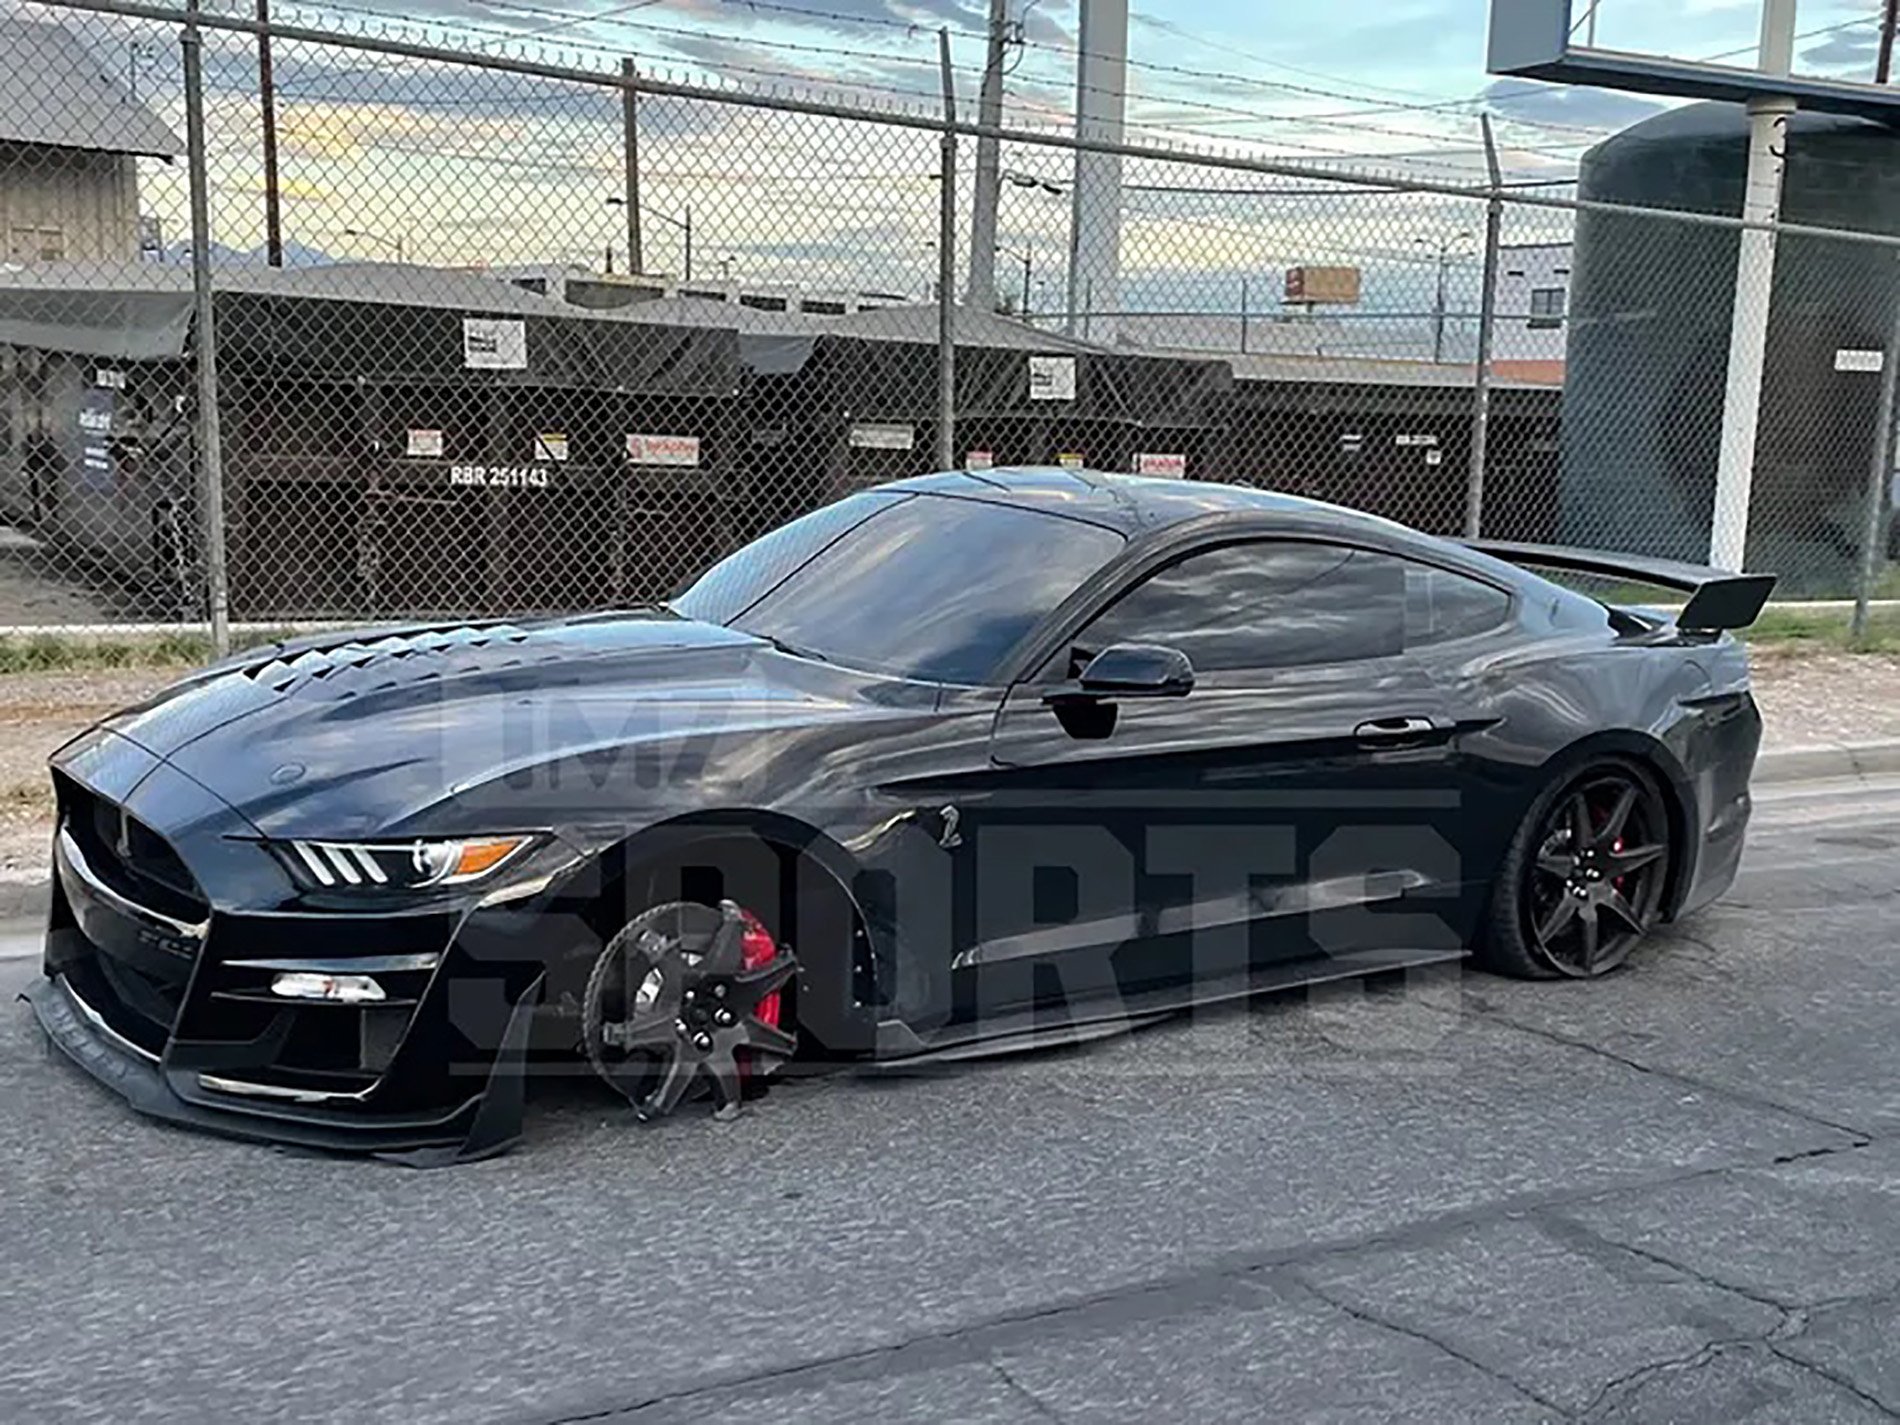 Former NFL Running Back Marshawn Lynch’s Shelby GT500 Takes A Hit